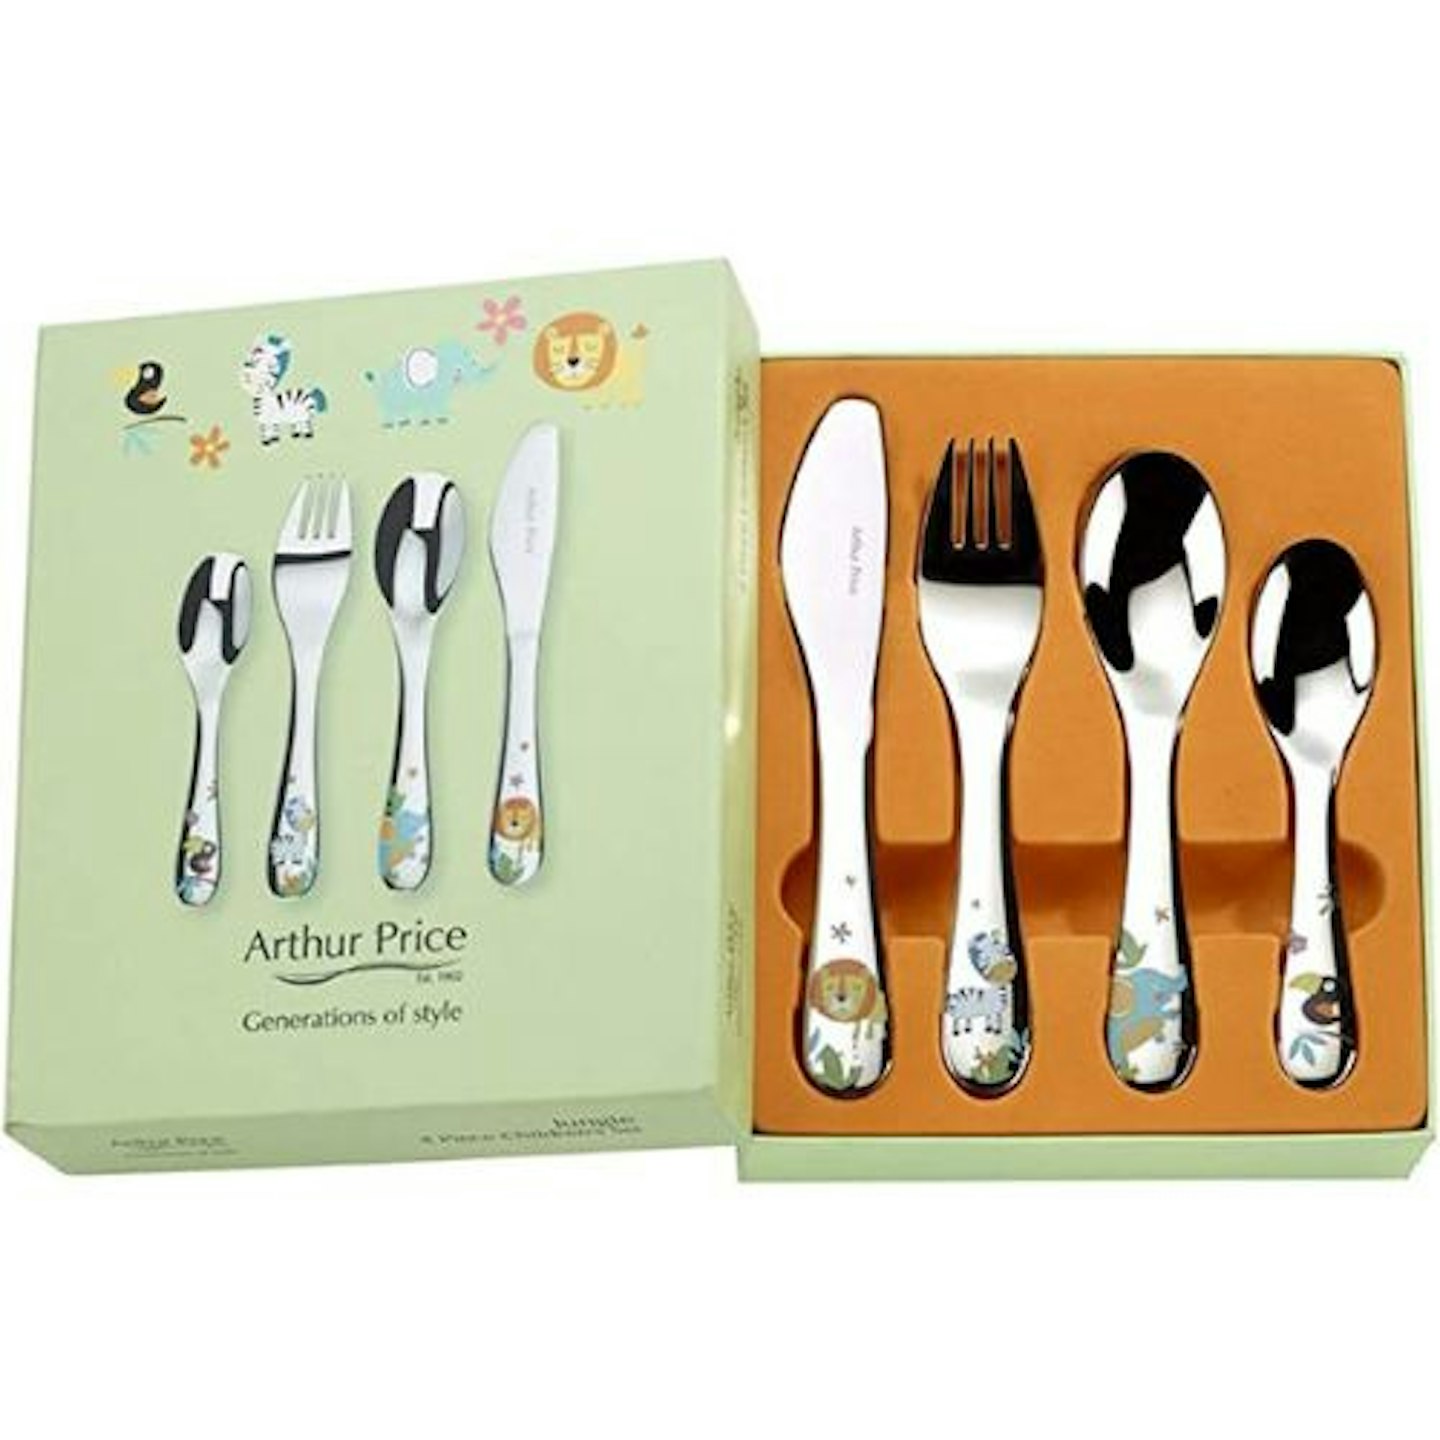 Toddler Silverware, Kids Utensils, Stainless Steel Forks Spoons Set with  Travel Case for 1 2 3 4 year old. Metal Cutlery for Children, Girls Boys